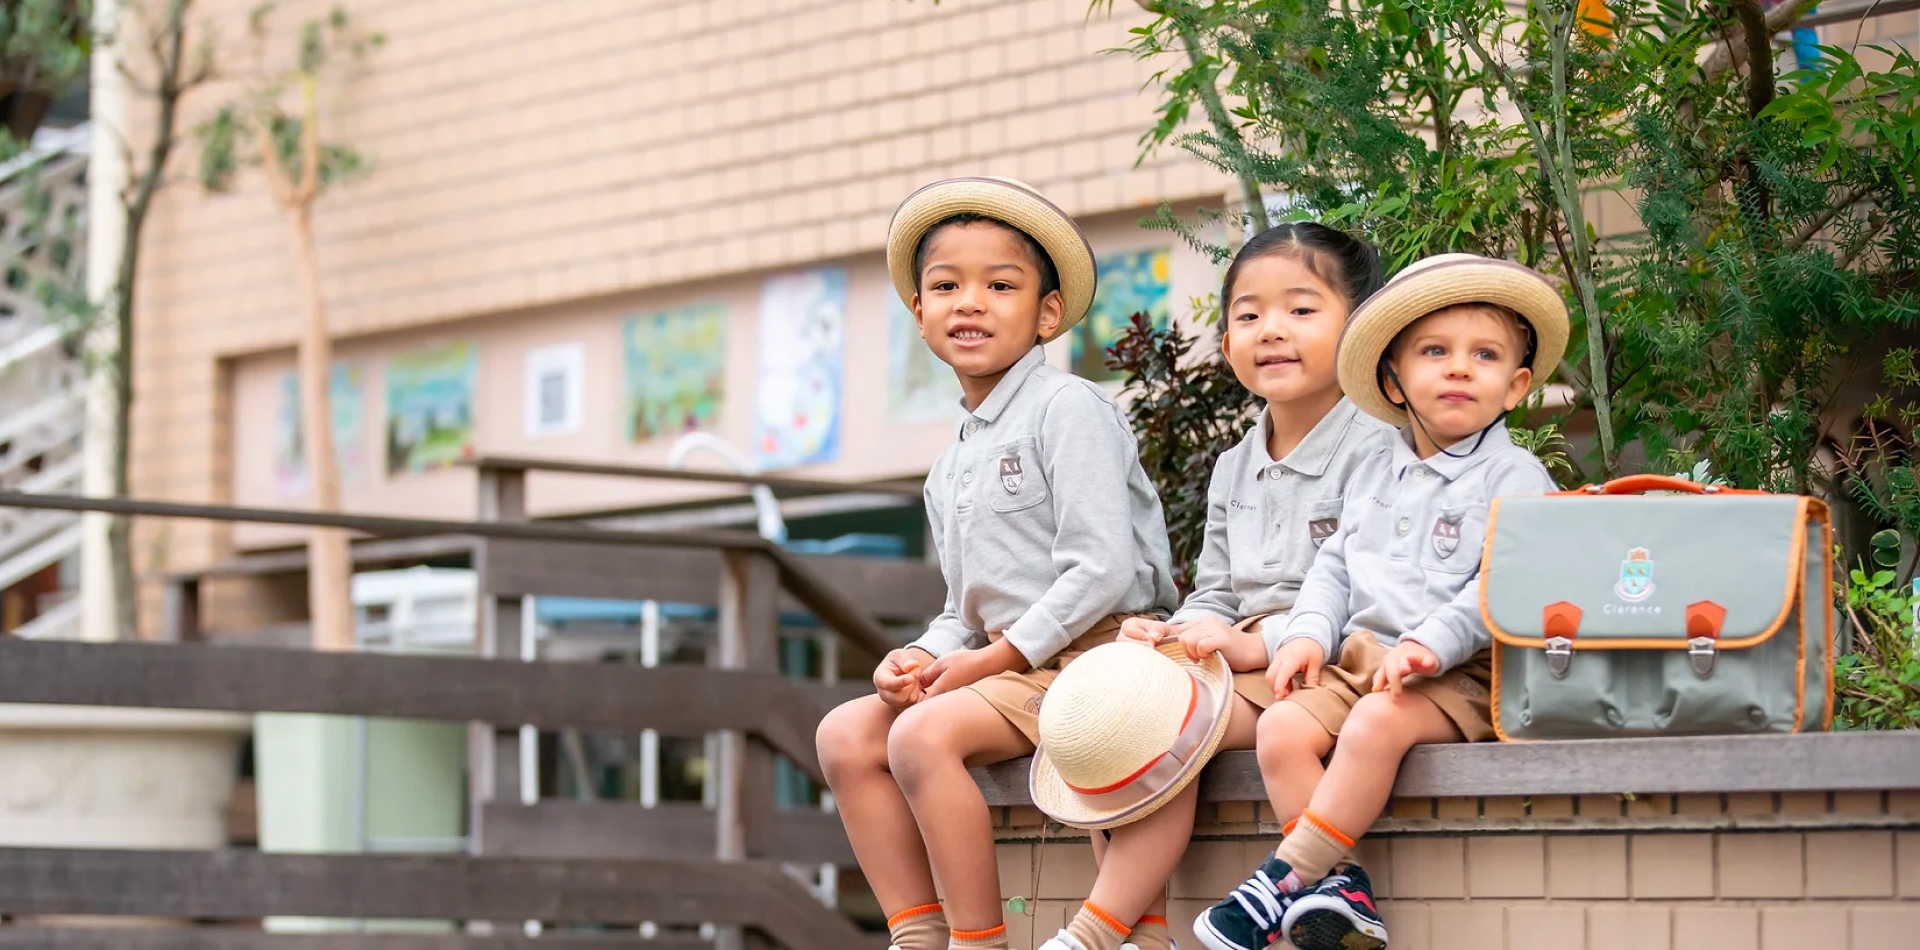 clarence-tokyo-preprep-students-outside-2